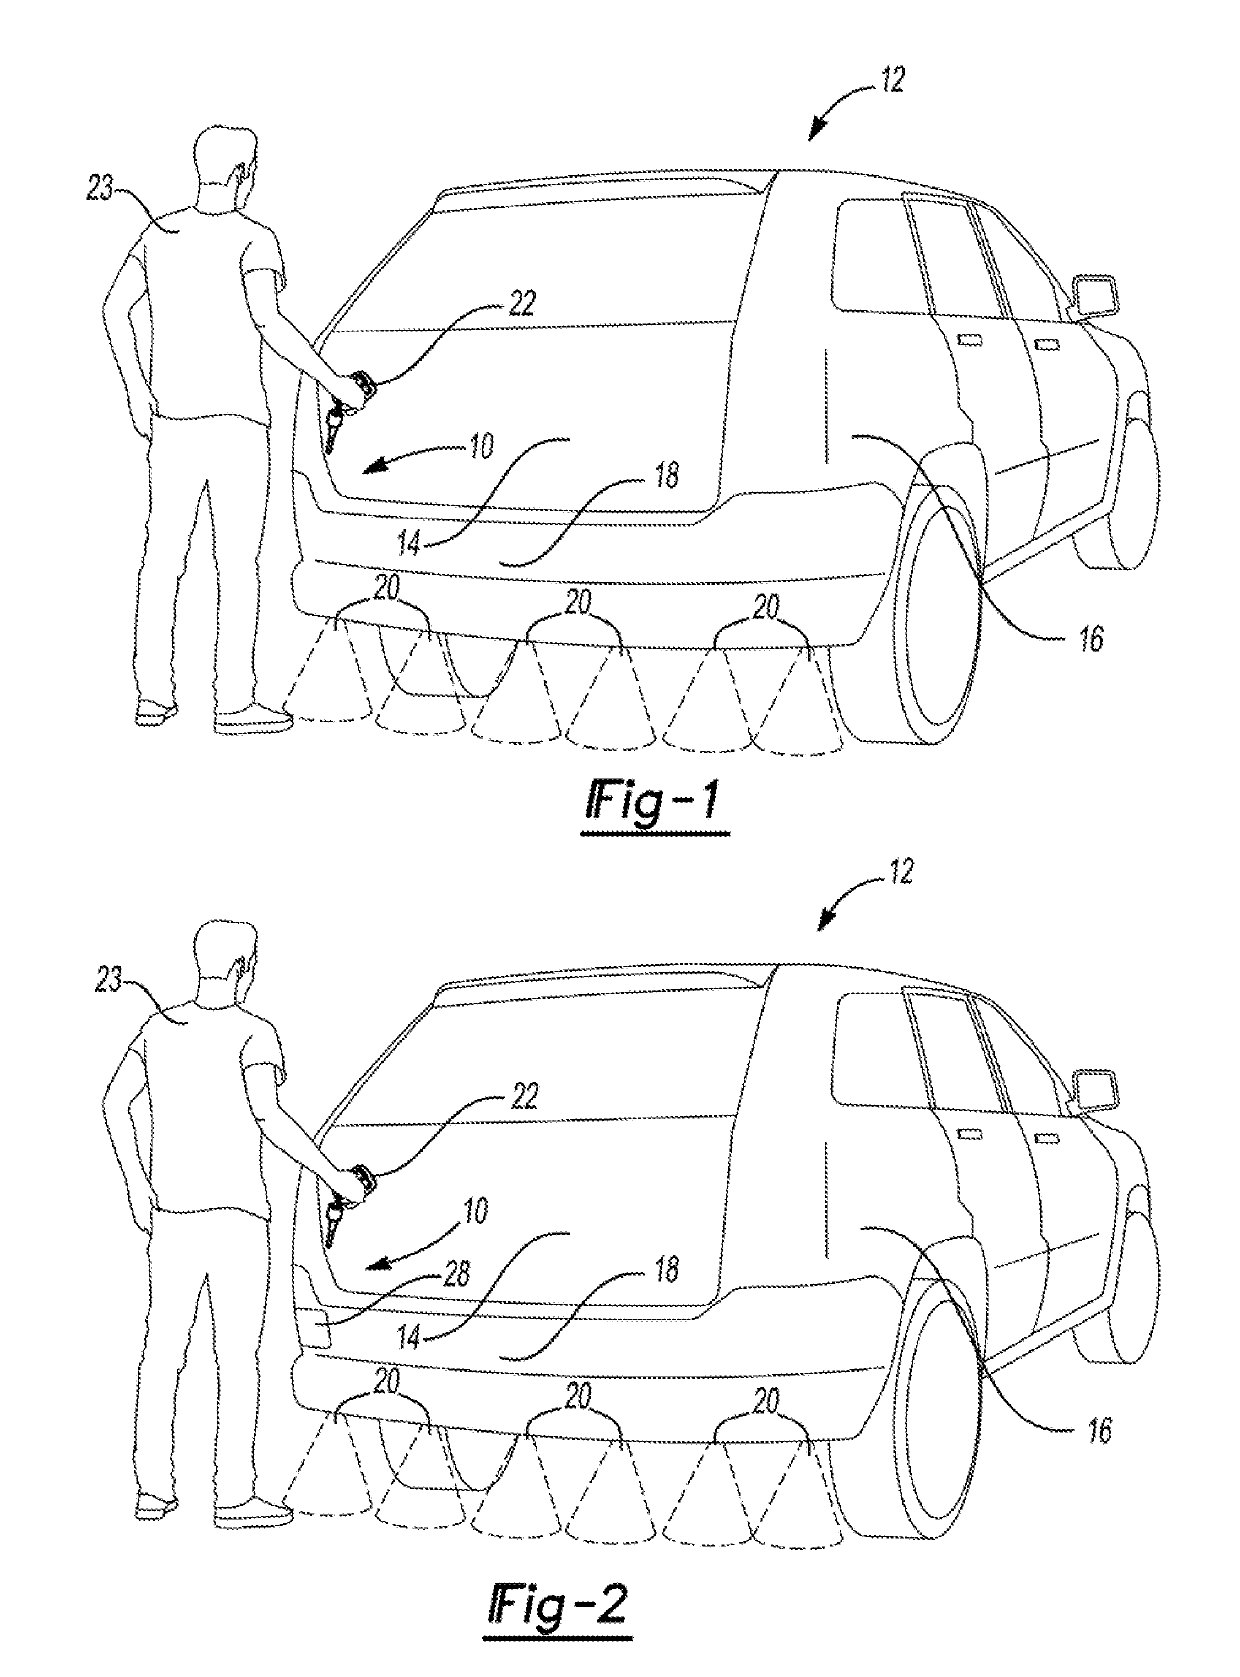 Ultrasonic object detection system for motor vehicles and method of operation thereof